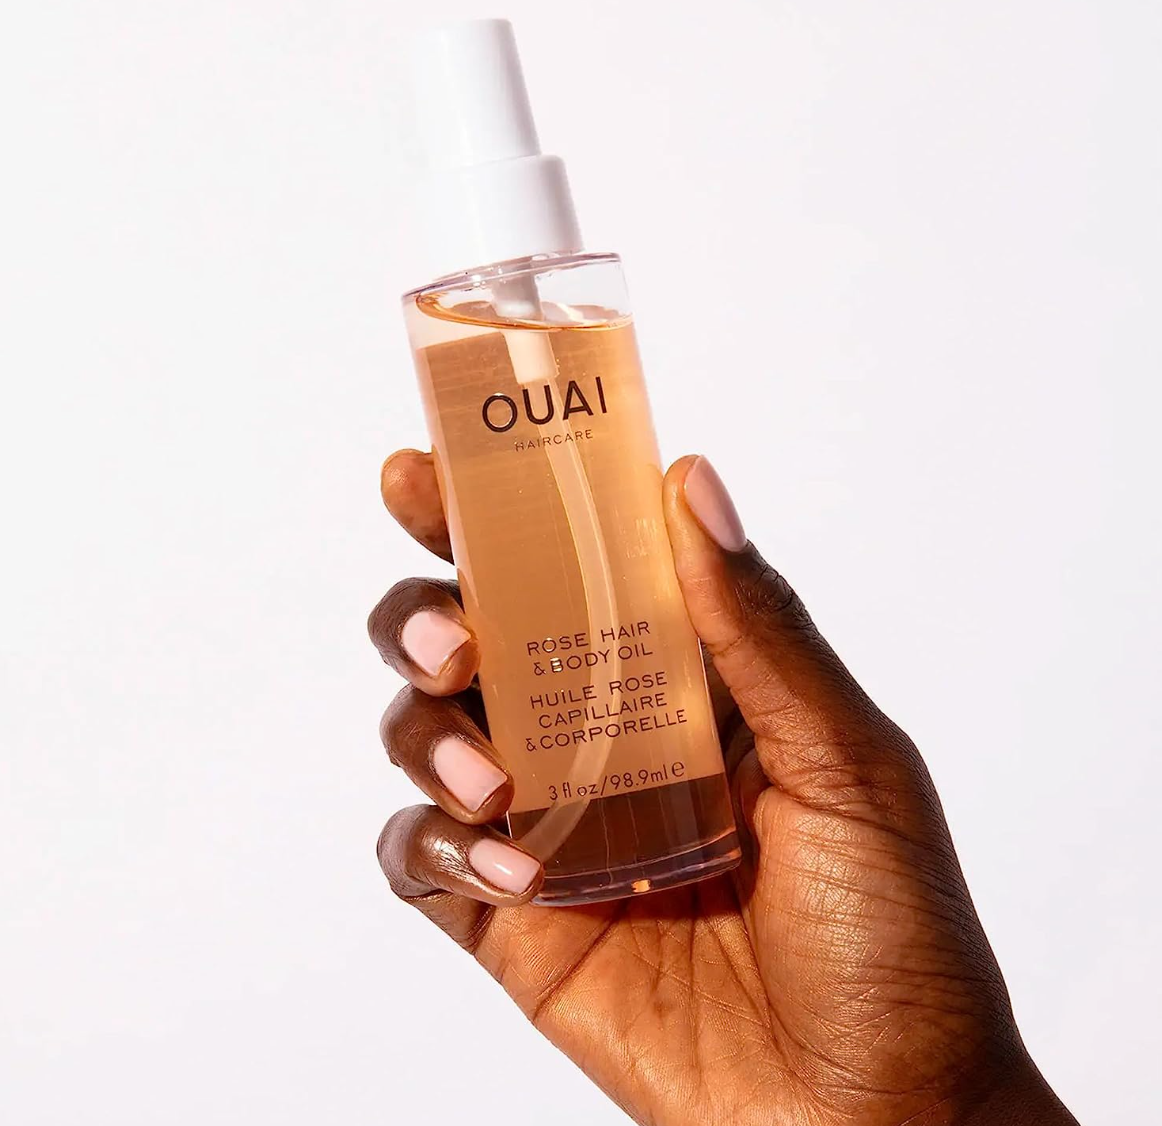 OUAI Rose Hair & Body Oil. A Luxurious, Multi-Purpose Oil to Hydrate Your Hair and Skin. It’s Fast-Absorbing and Scented with Rose and Bergamot. Free from Parabens, Sulfates and Phthalates (3 Oz)